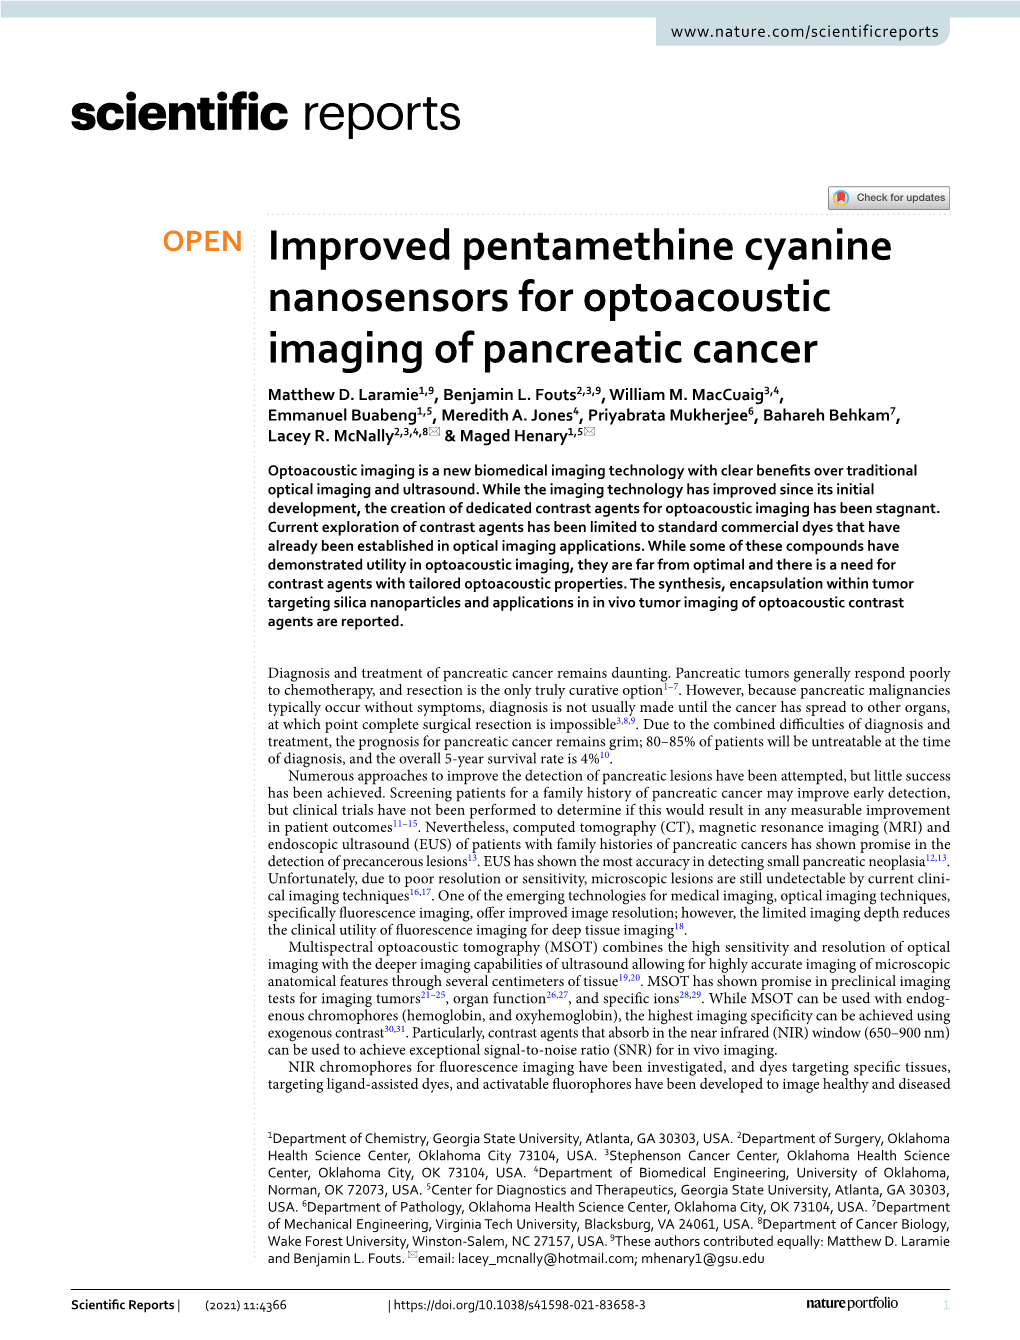 Improved Pentamethine Cyanine Nanosensors for Optoacoustic Imaging of Pancreatic Cancer Matthew D